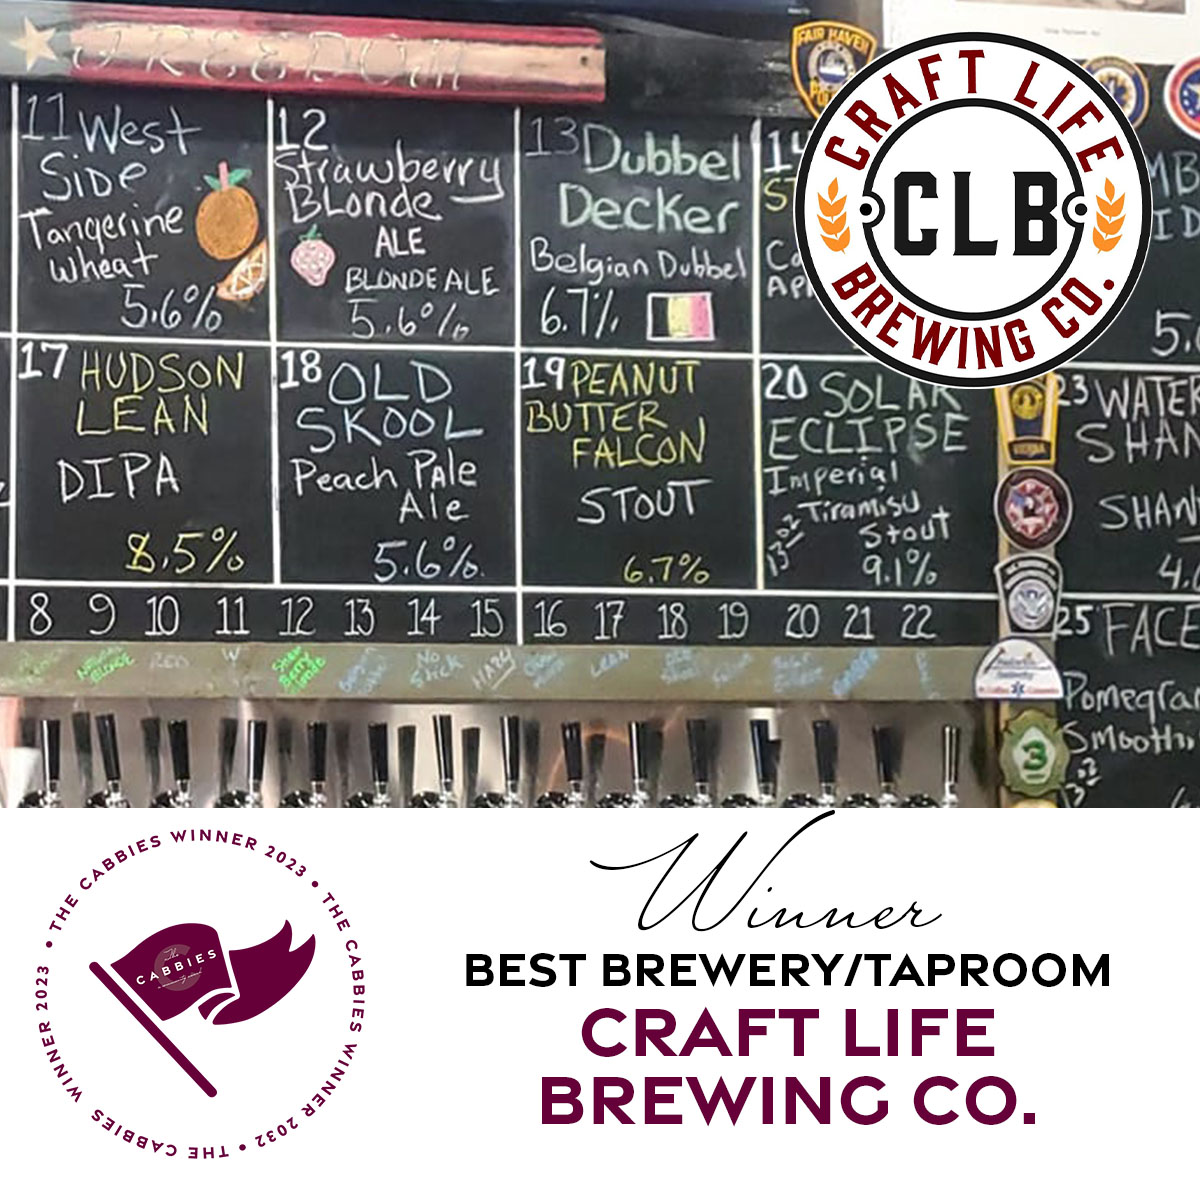 2022 Cabbies Winner for Best Brewery or Taphouse, Craft Life